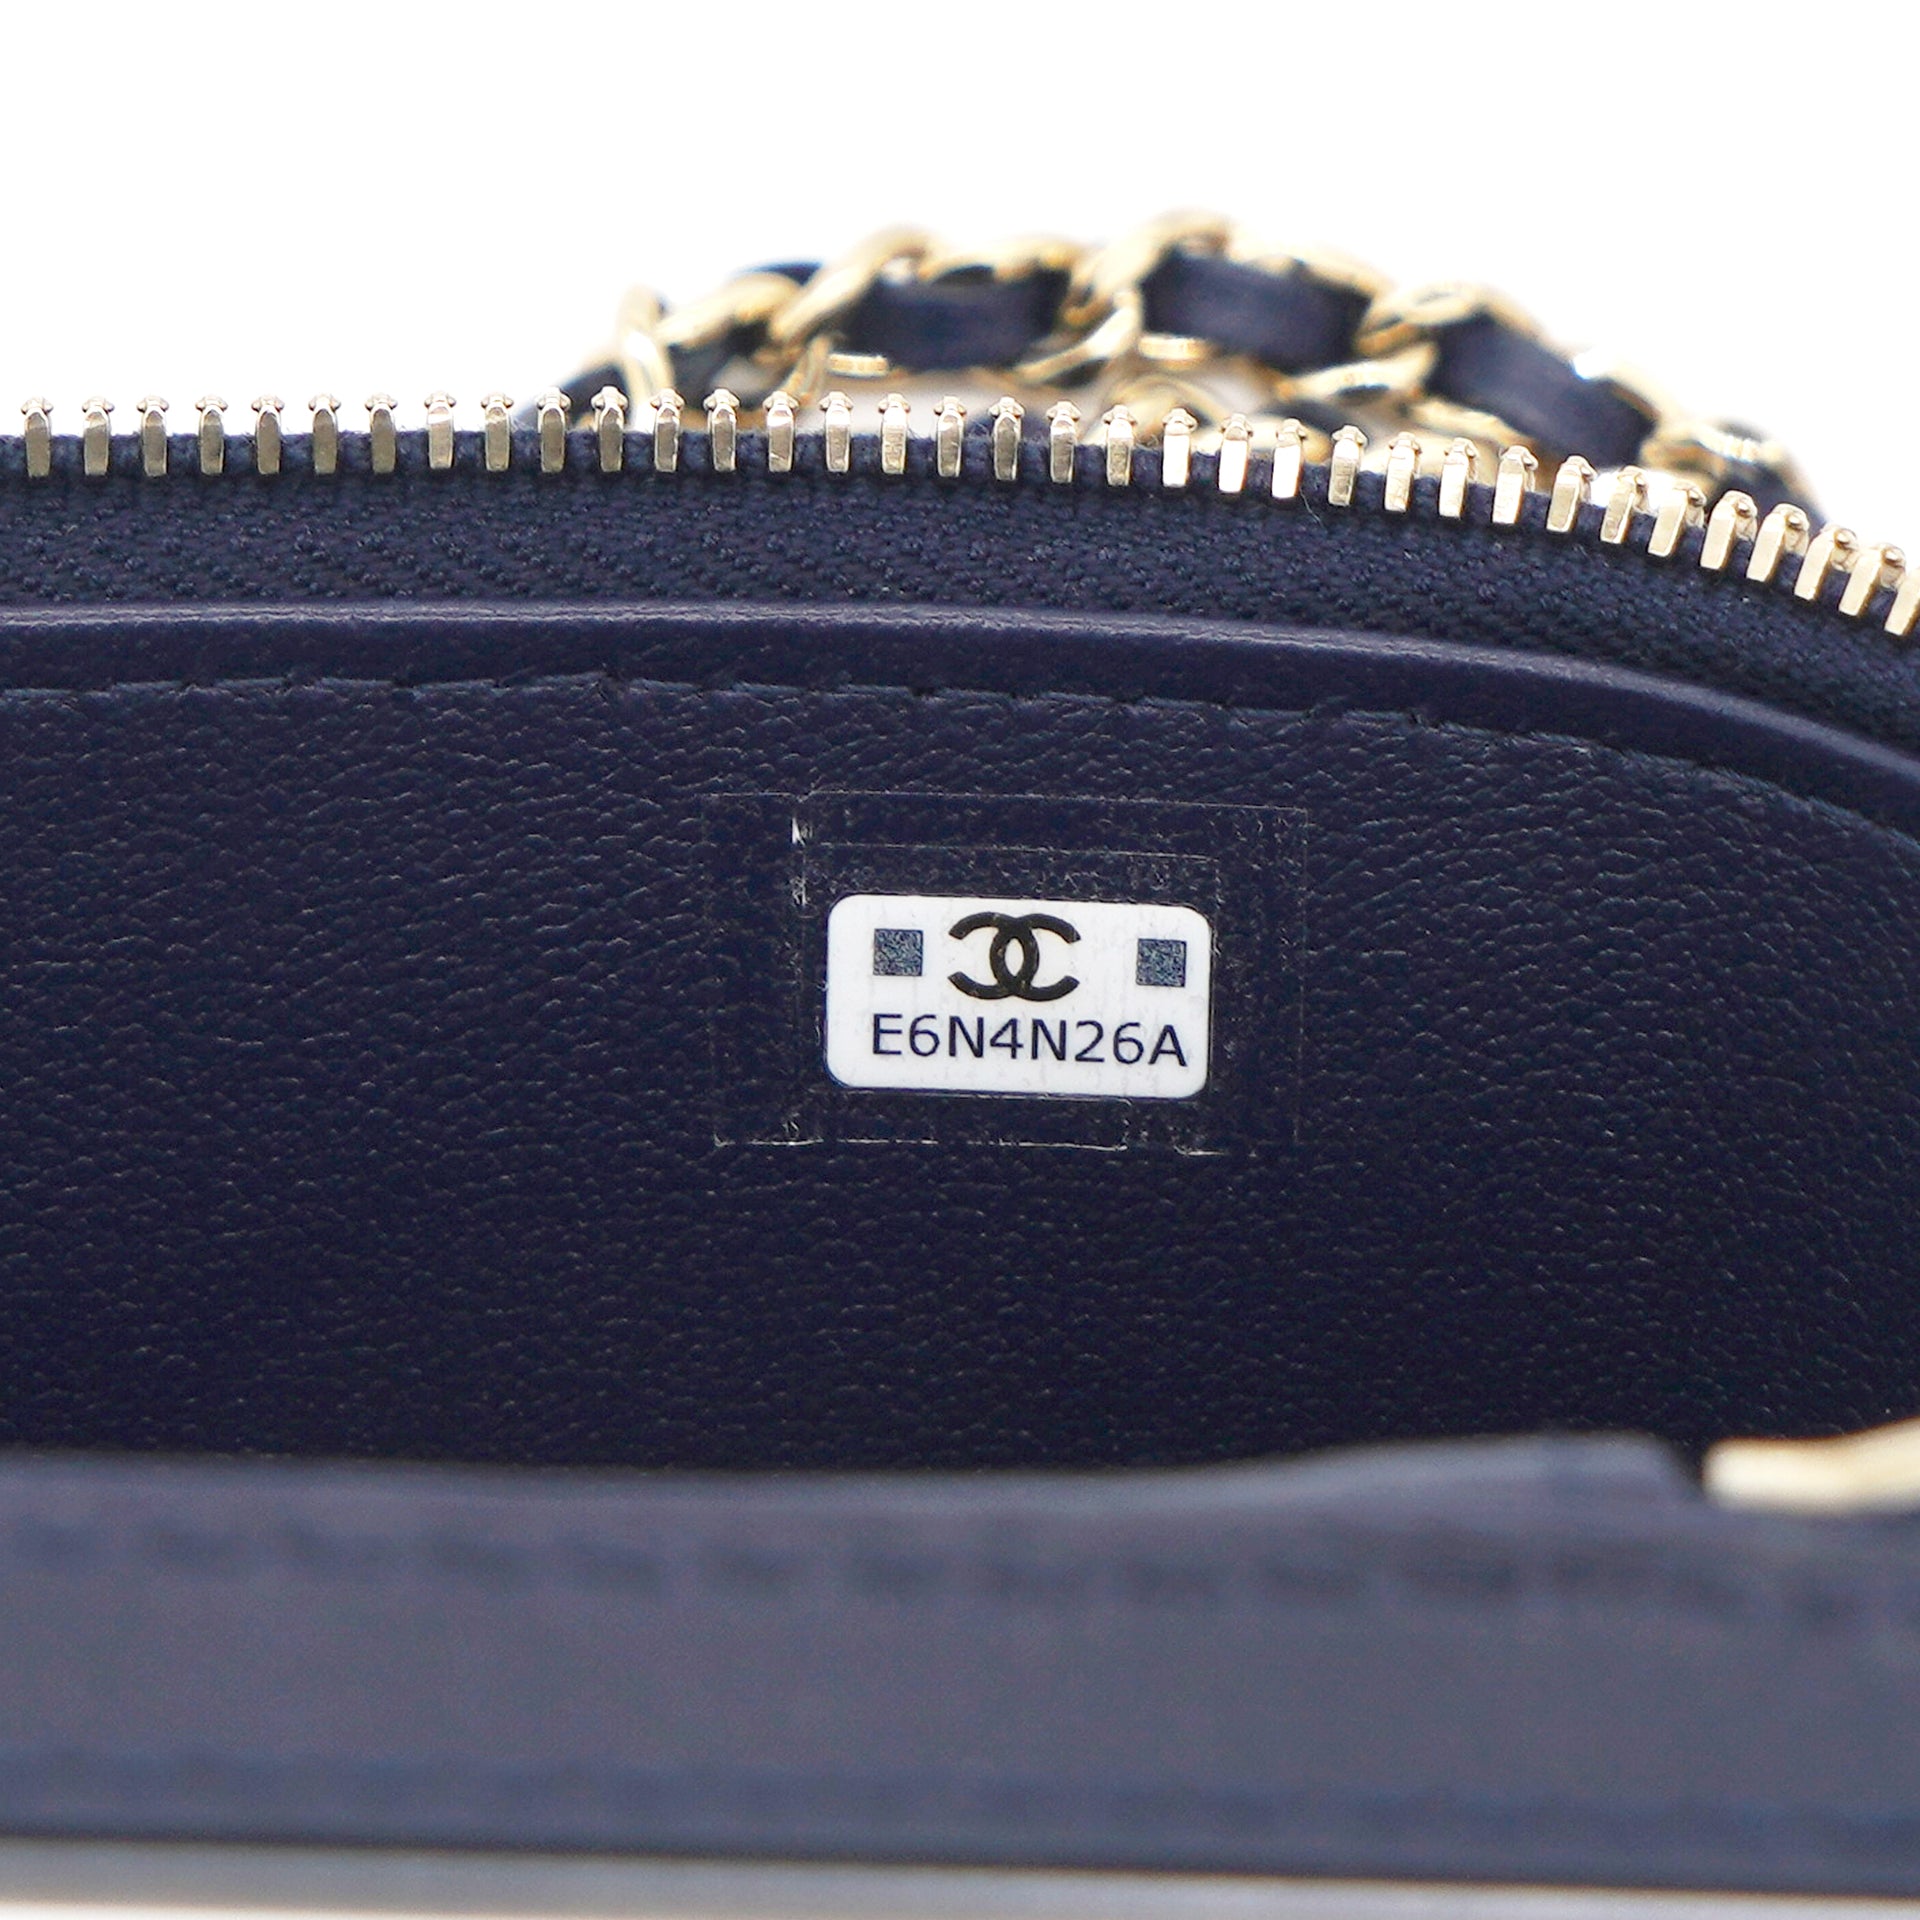 Lambskin Quilted Small Top Handle Vanity Case With Chain Navy